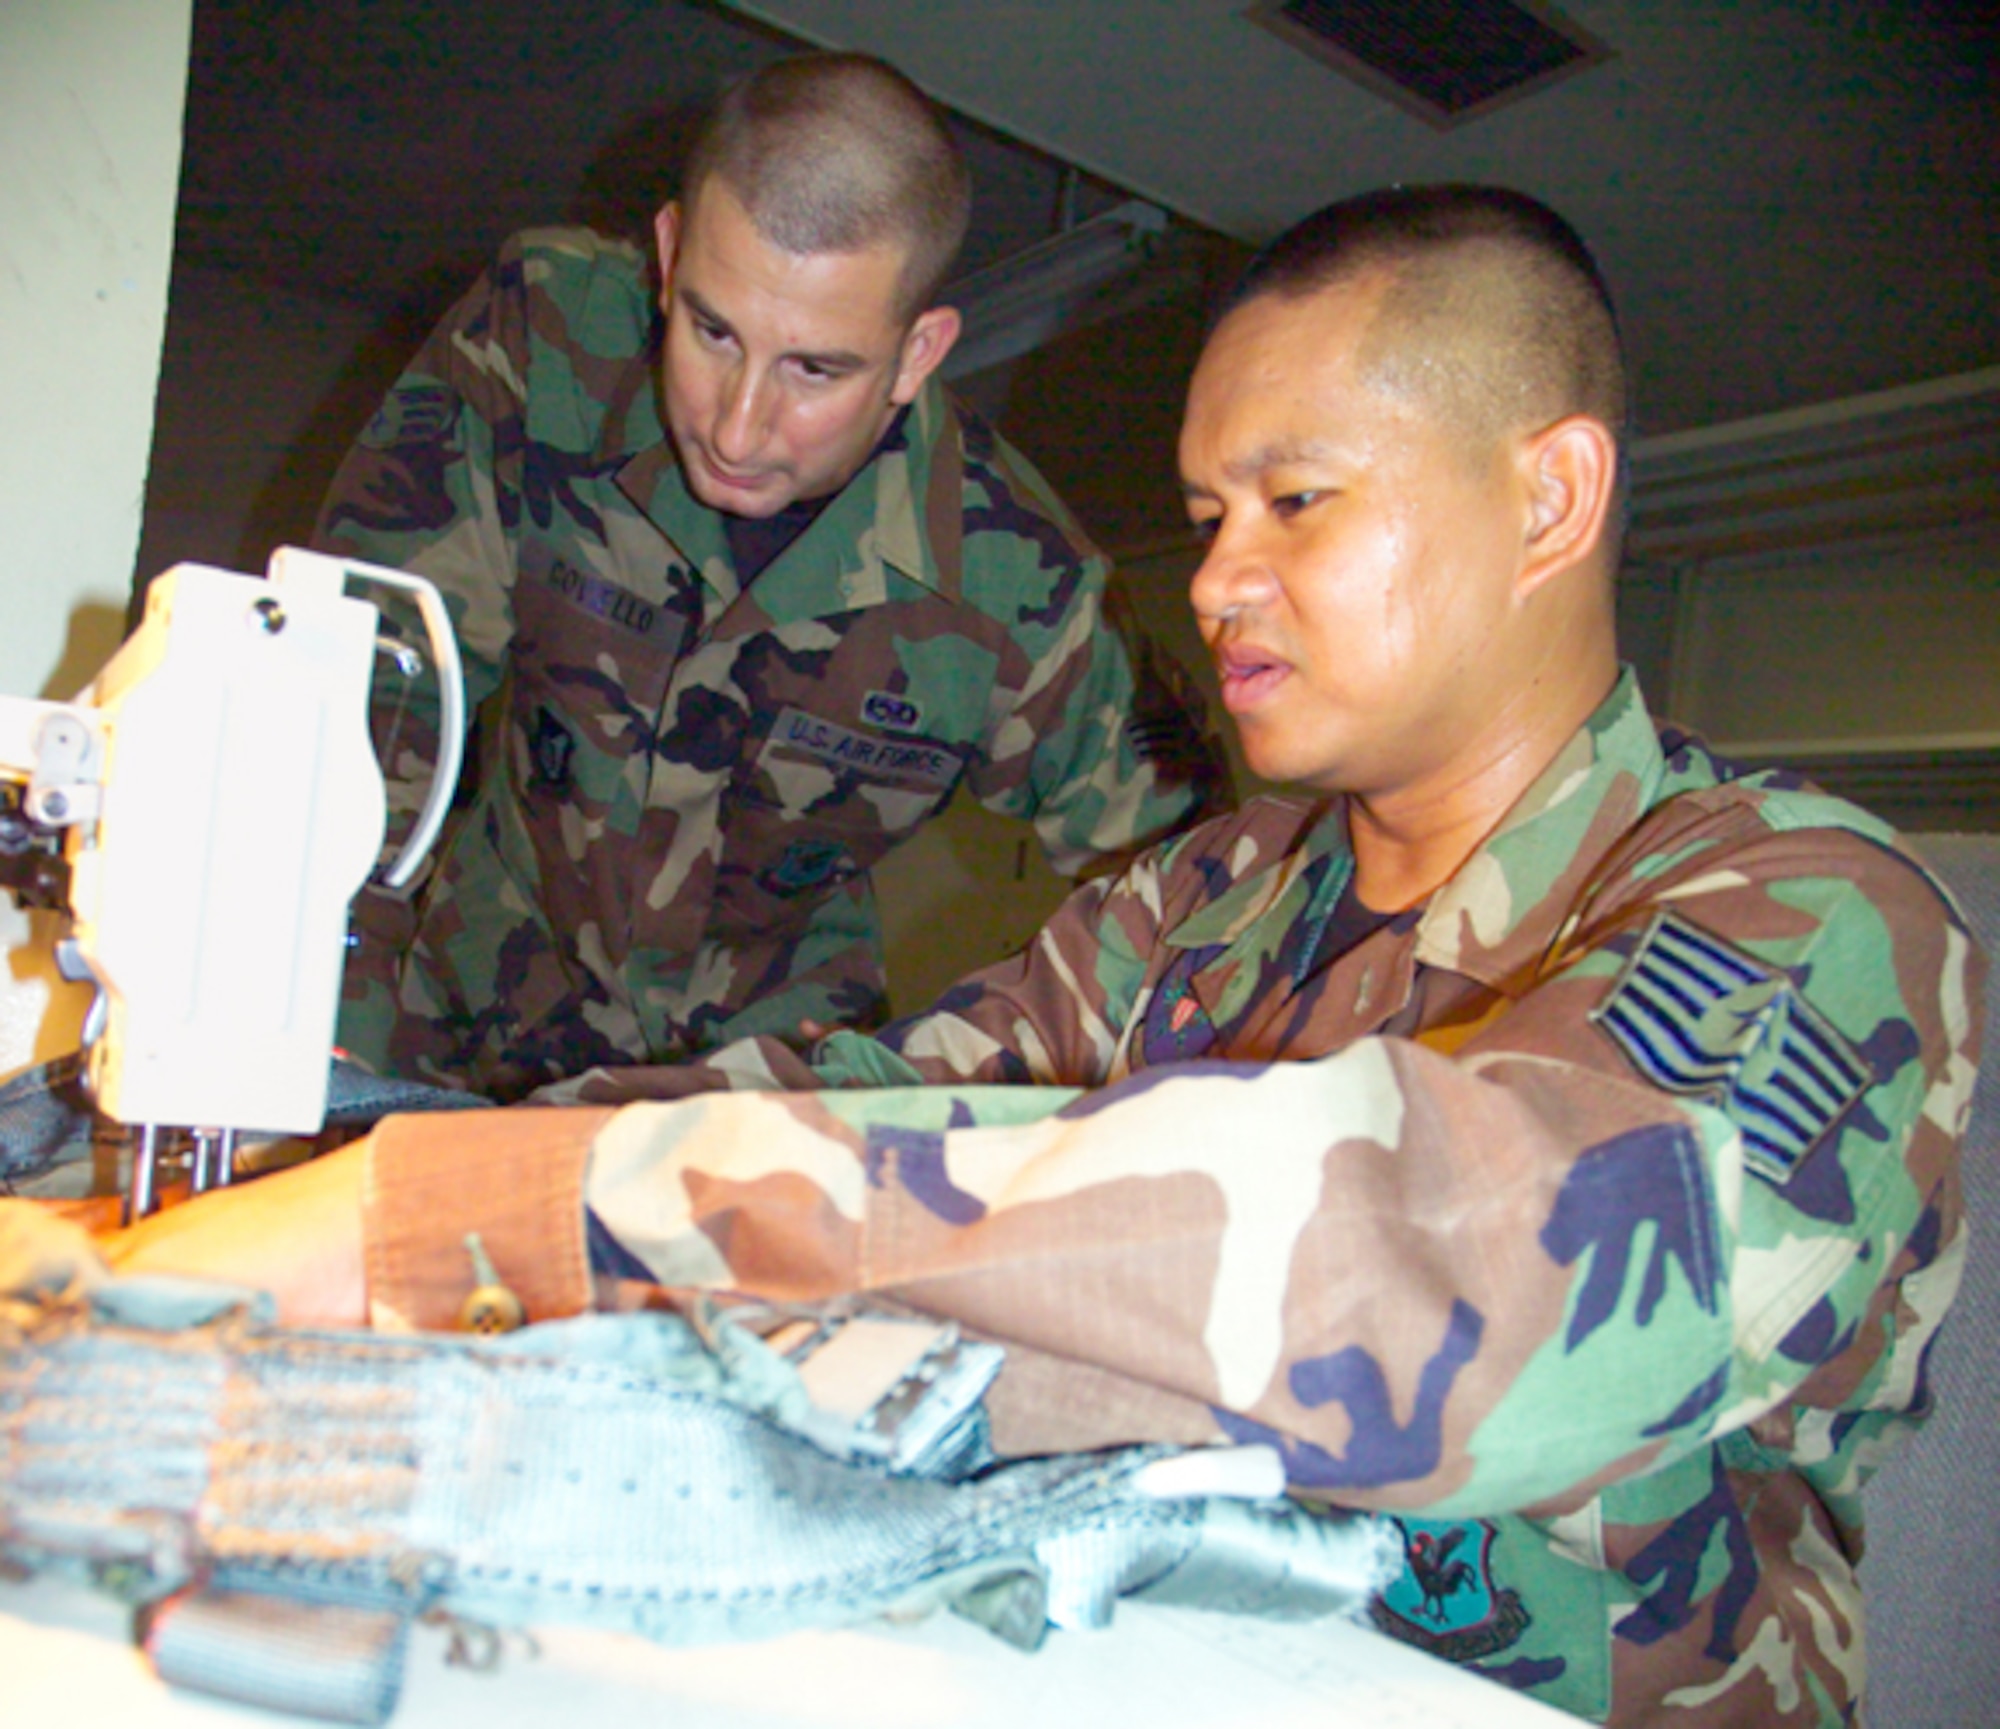 Airman 1st Class Robert Coviello teaches Tech. Sgt. Calvin Warner, Aircrew Flight Equipment Flight, sewing techniques on a harness at Kadena Air Base, Japan. The instruction is part of cross utilization training to merge aircrew life support and survival equipment into a new Air Force specialty code, aircrew flight equipment.
U.S. Air Force photo/Scott Hallford